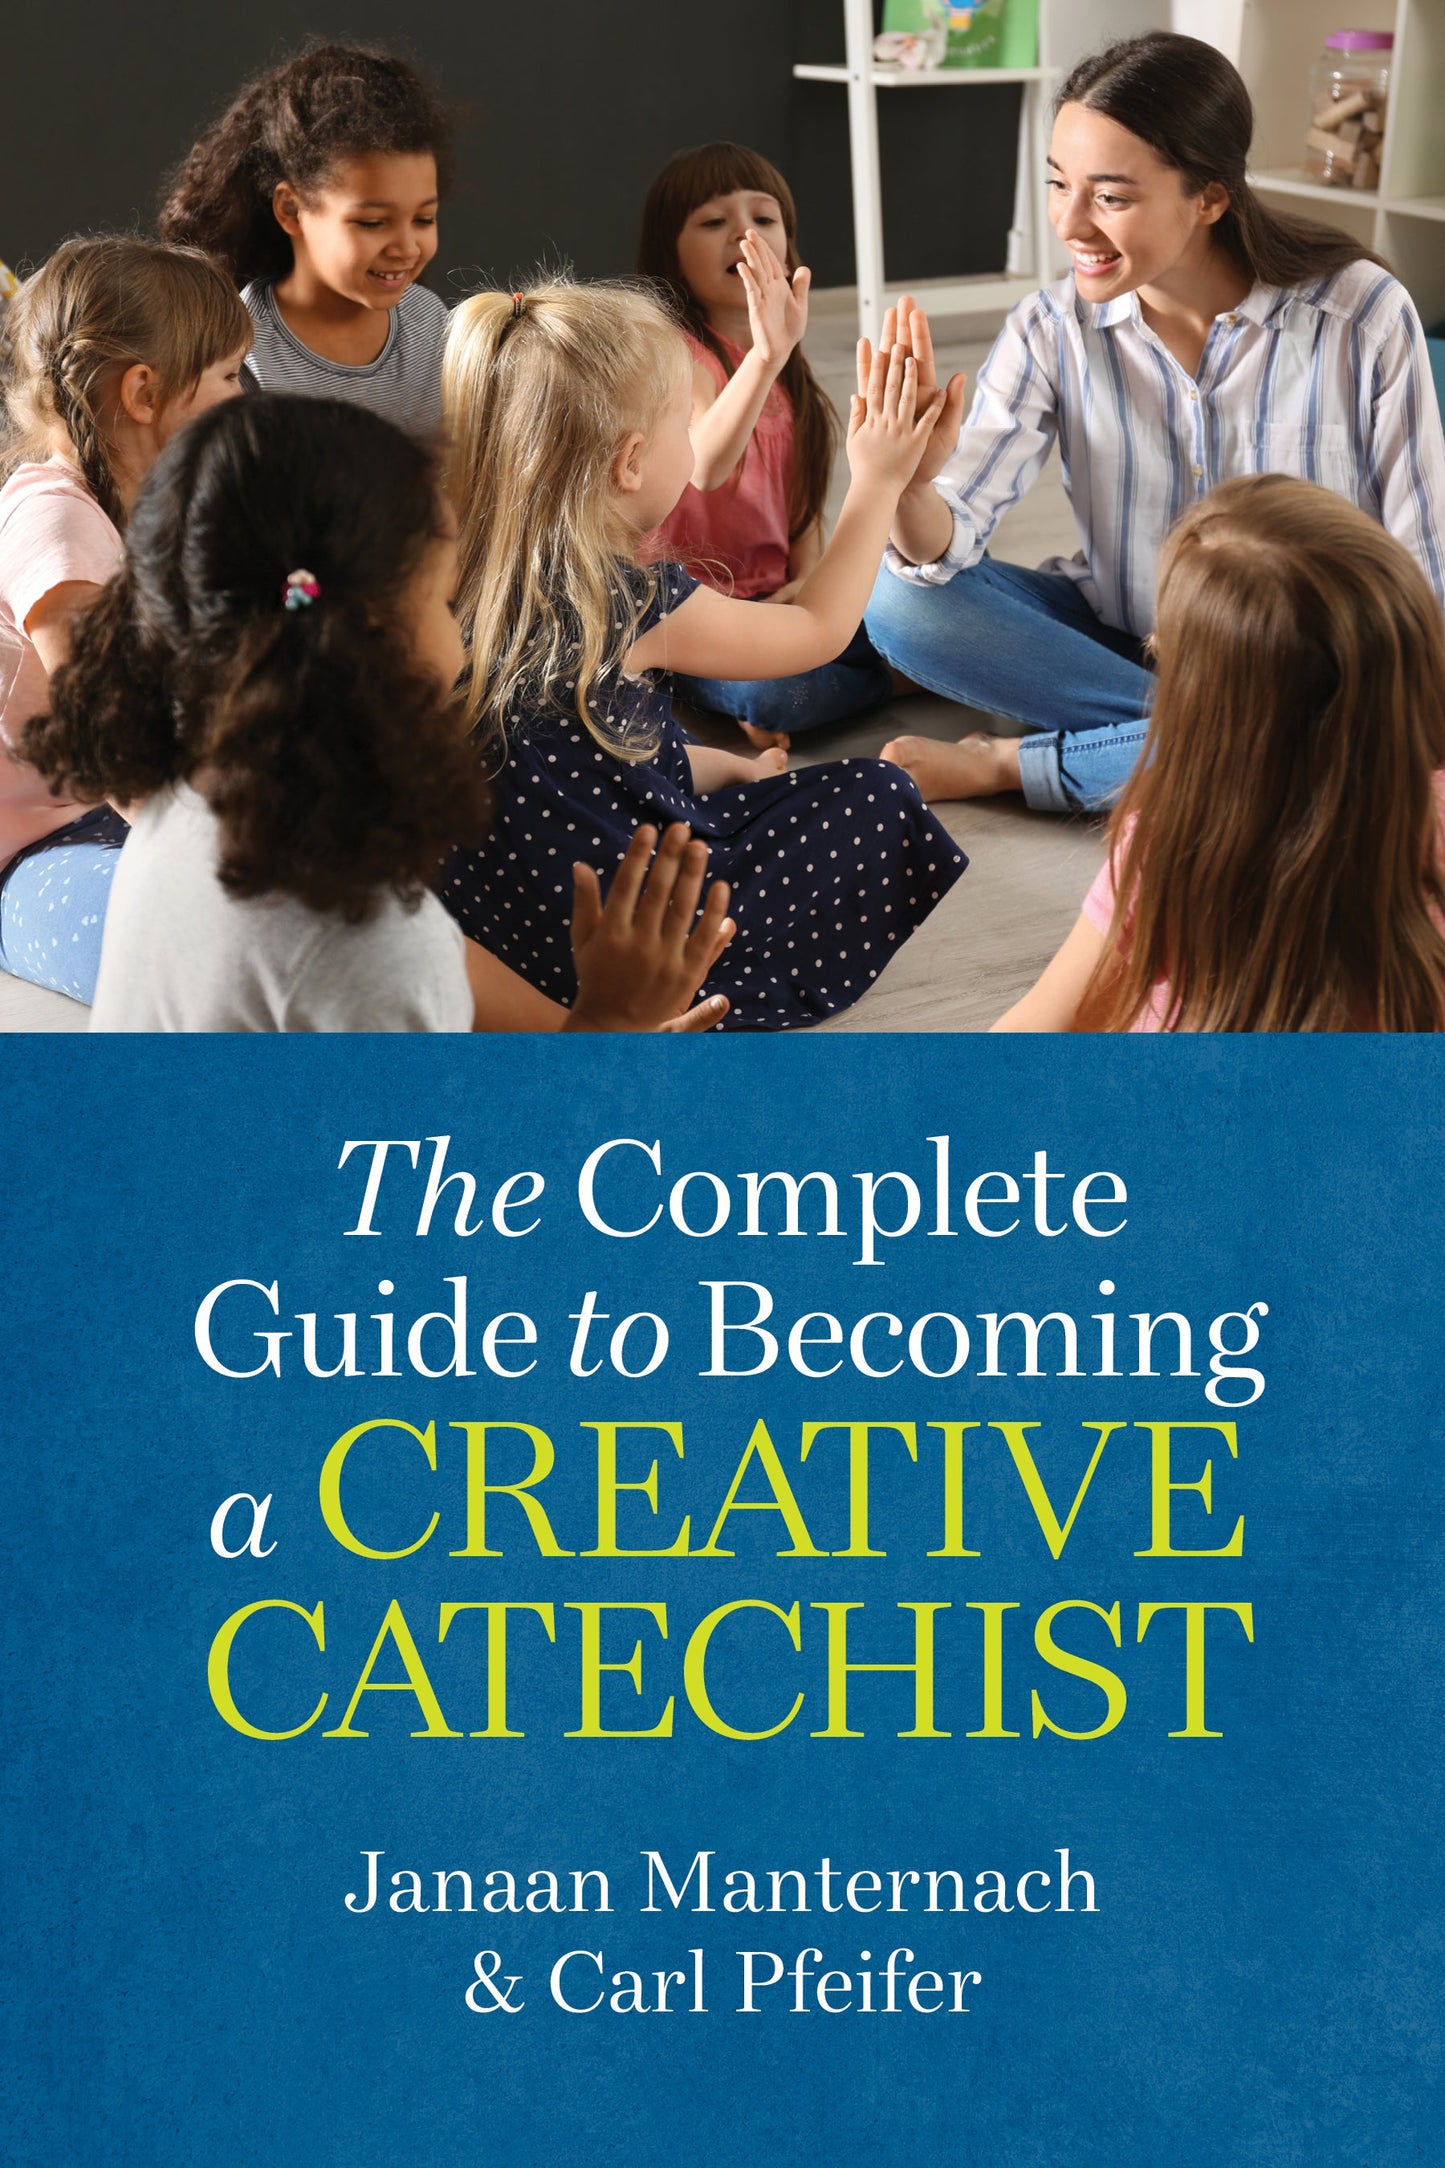 SALE - The Complete Guide to Becoming a Creative Catechist